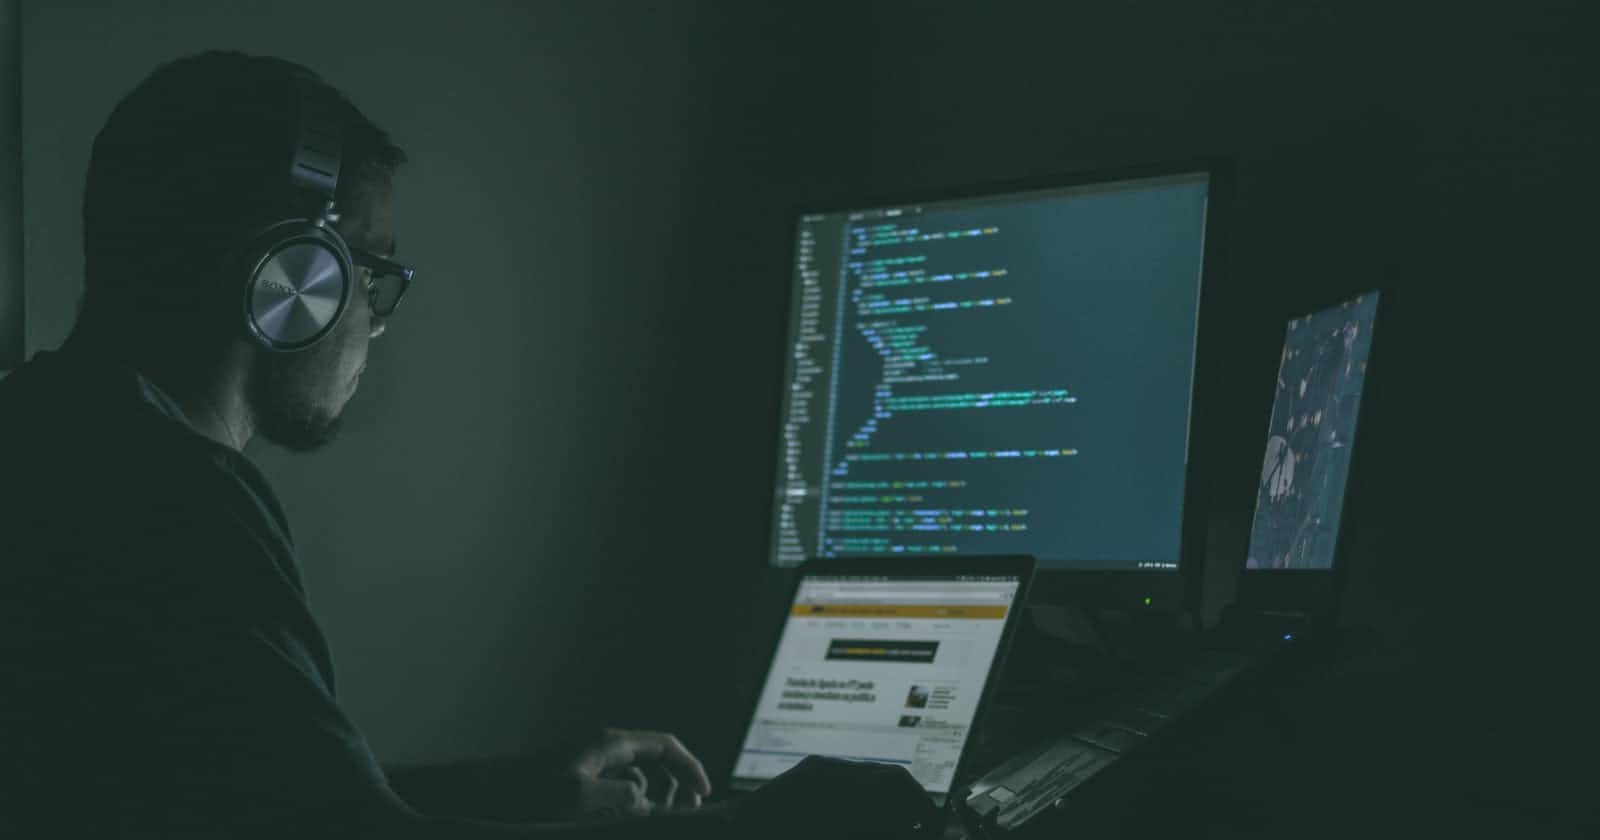 Unlock Your Potential: 12 Points to Become a Kickass Developer According to AI